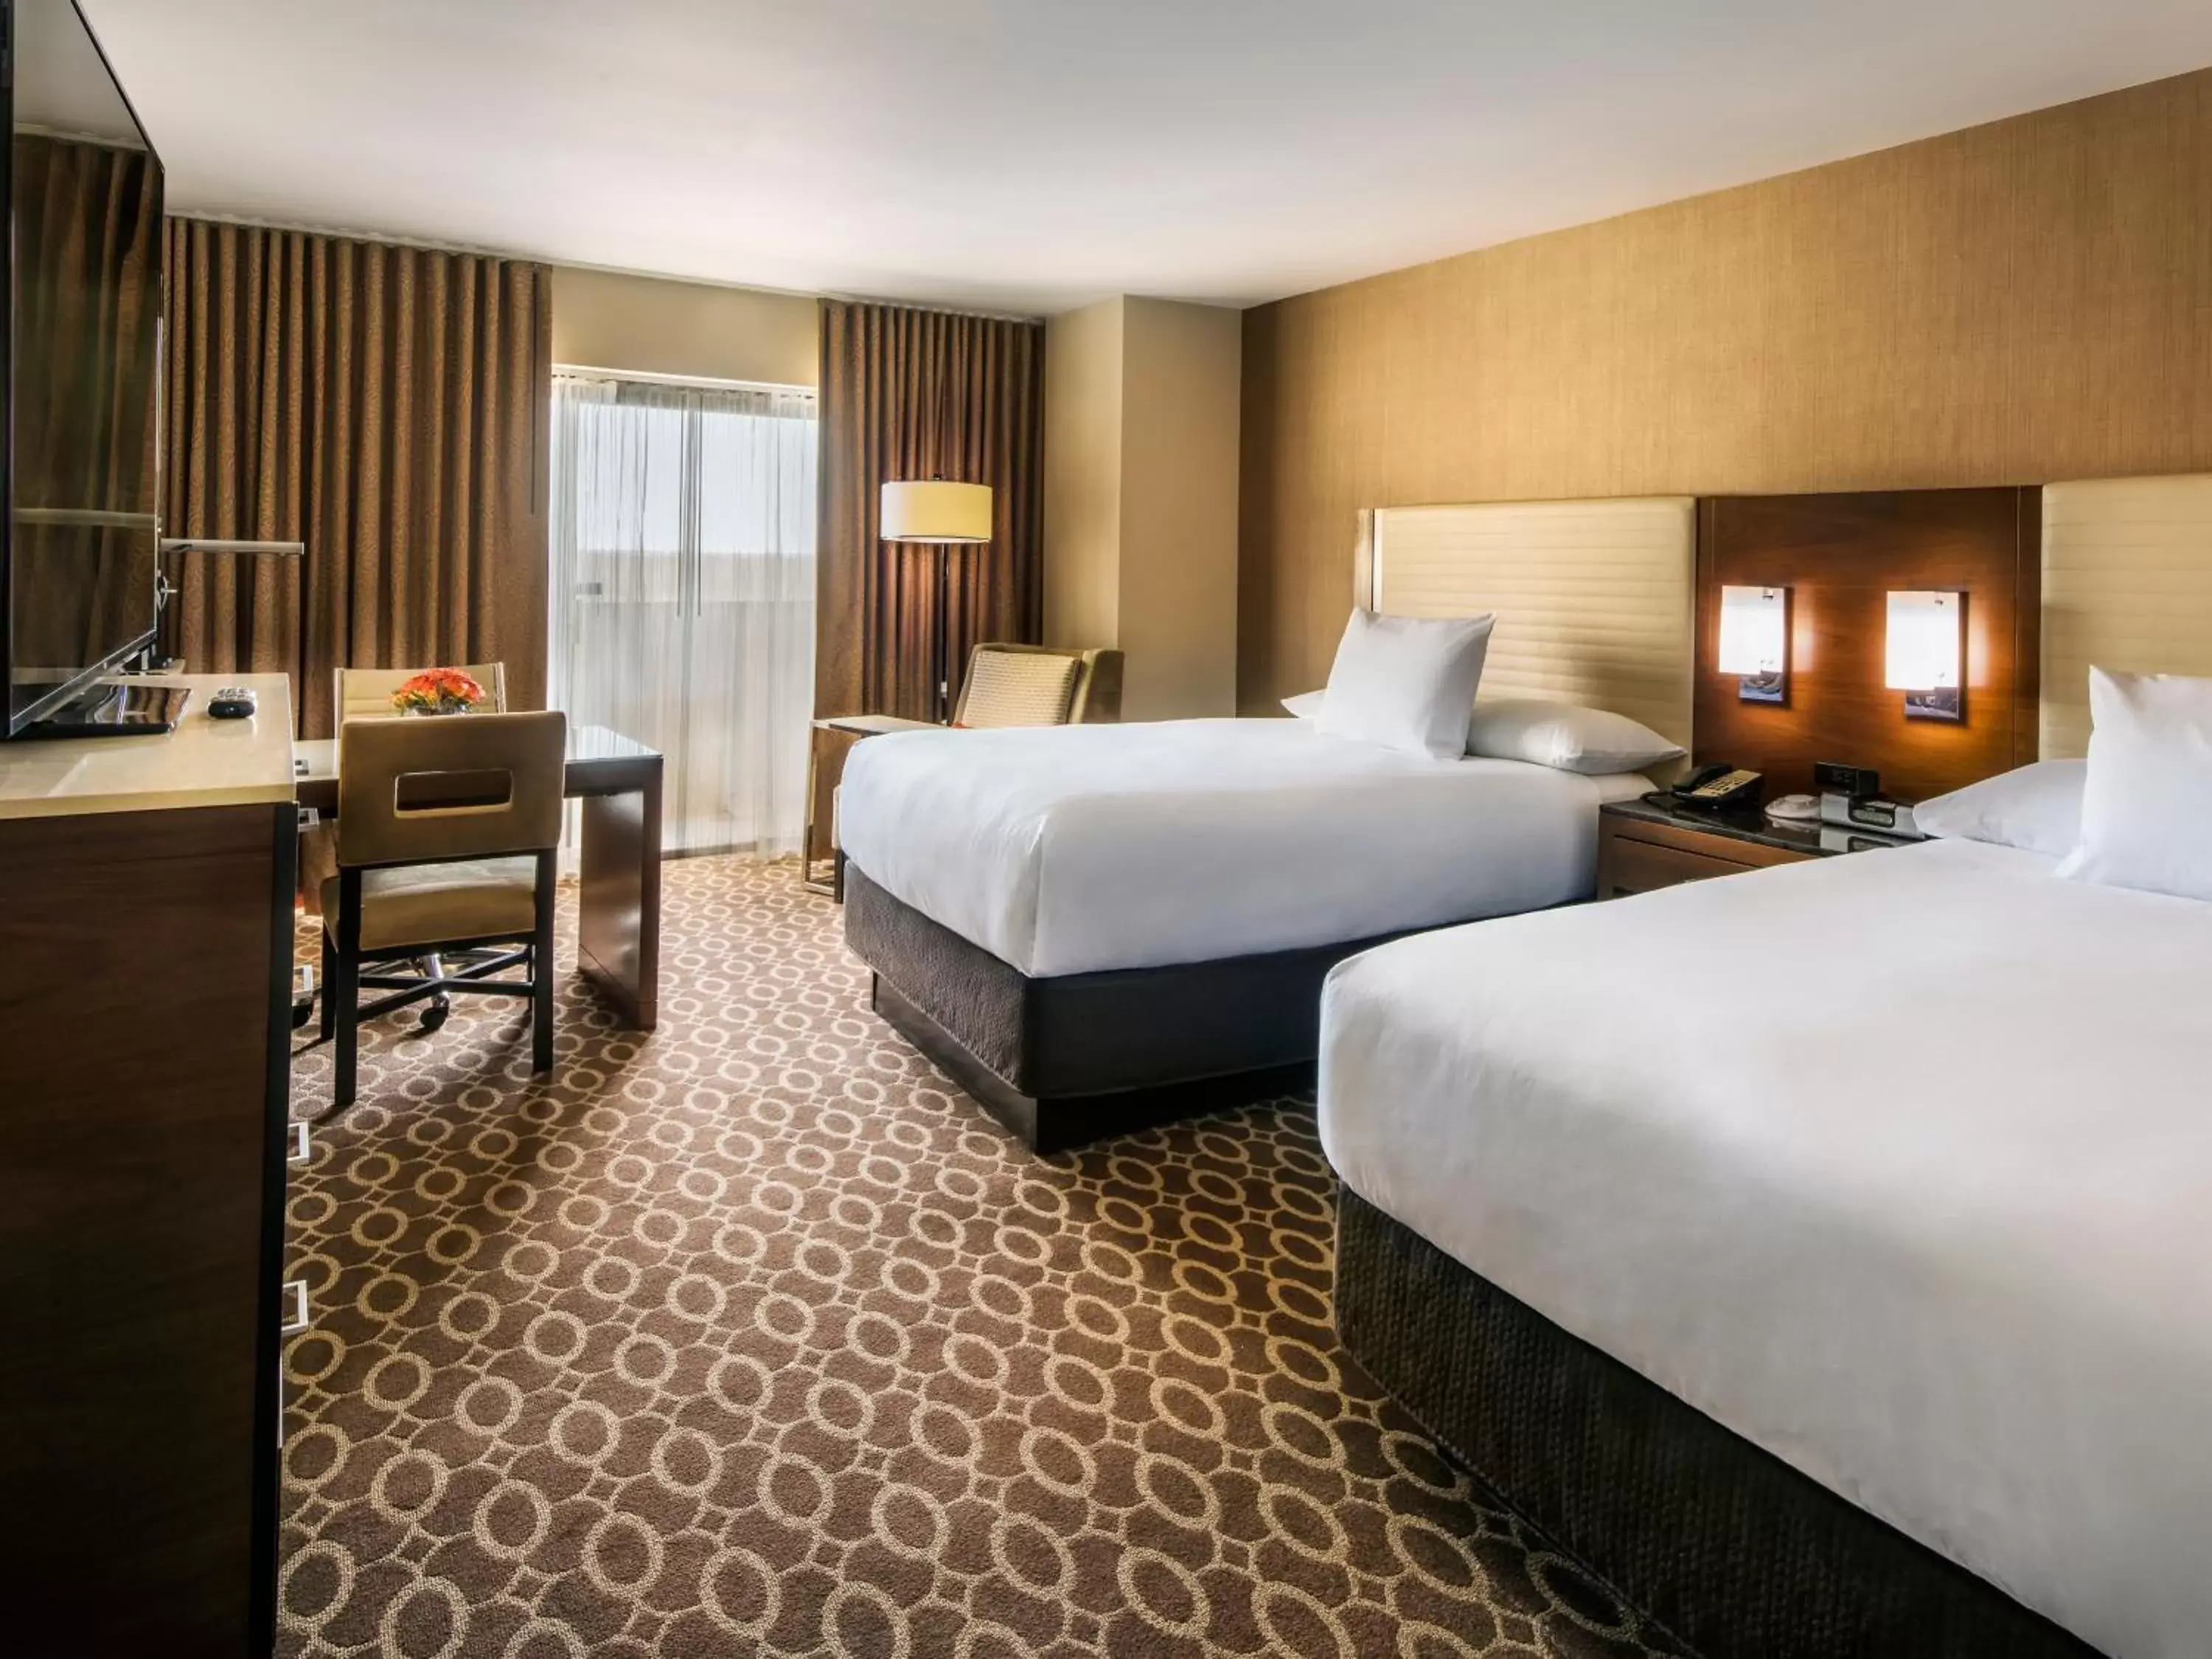 Double Room with Two Double Beds and Balcony in Hyatt Regency O'Hare Chicago